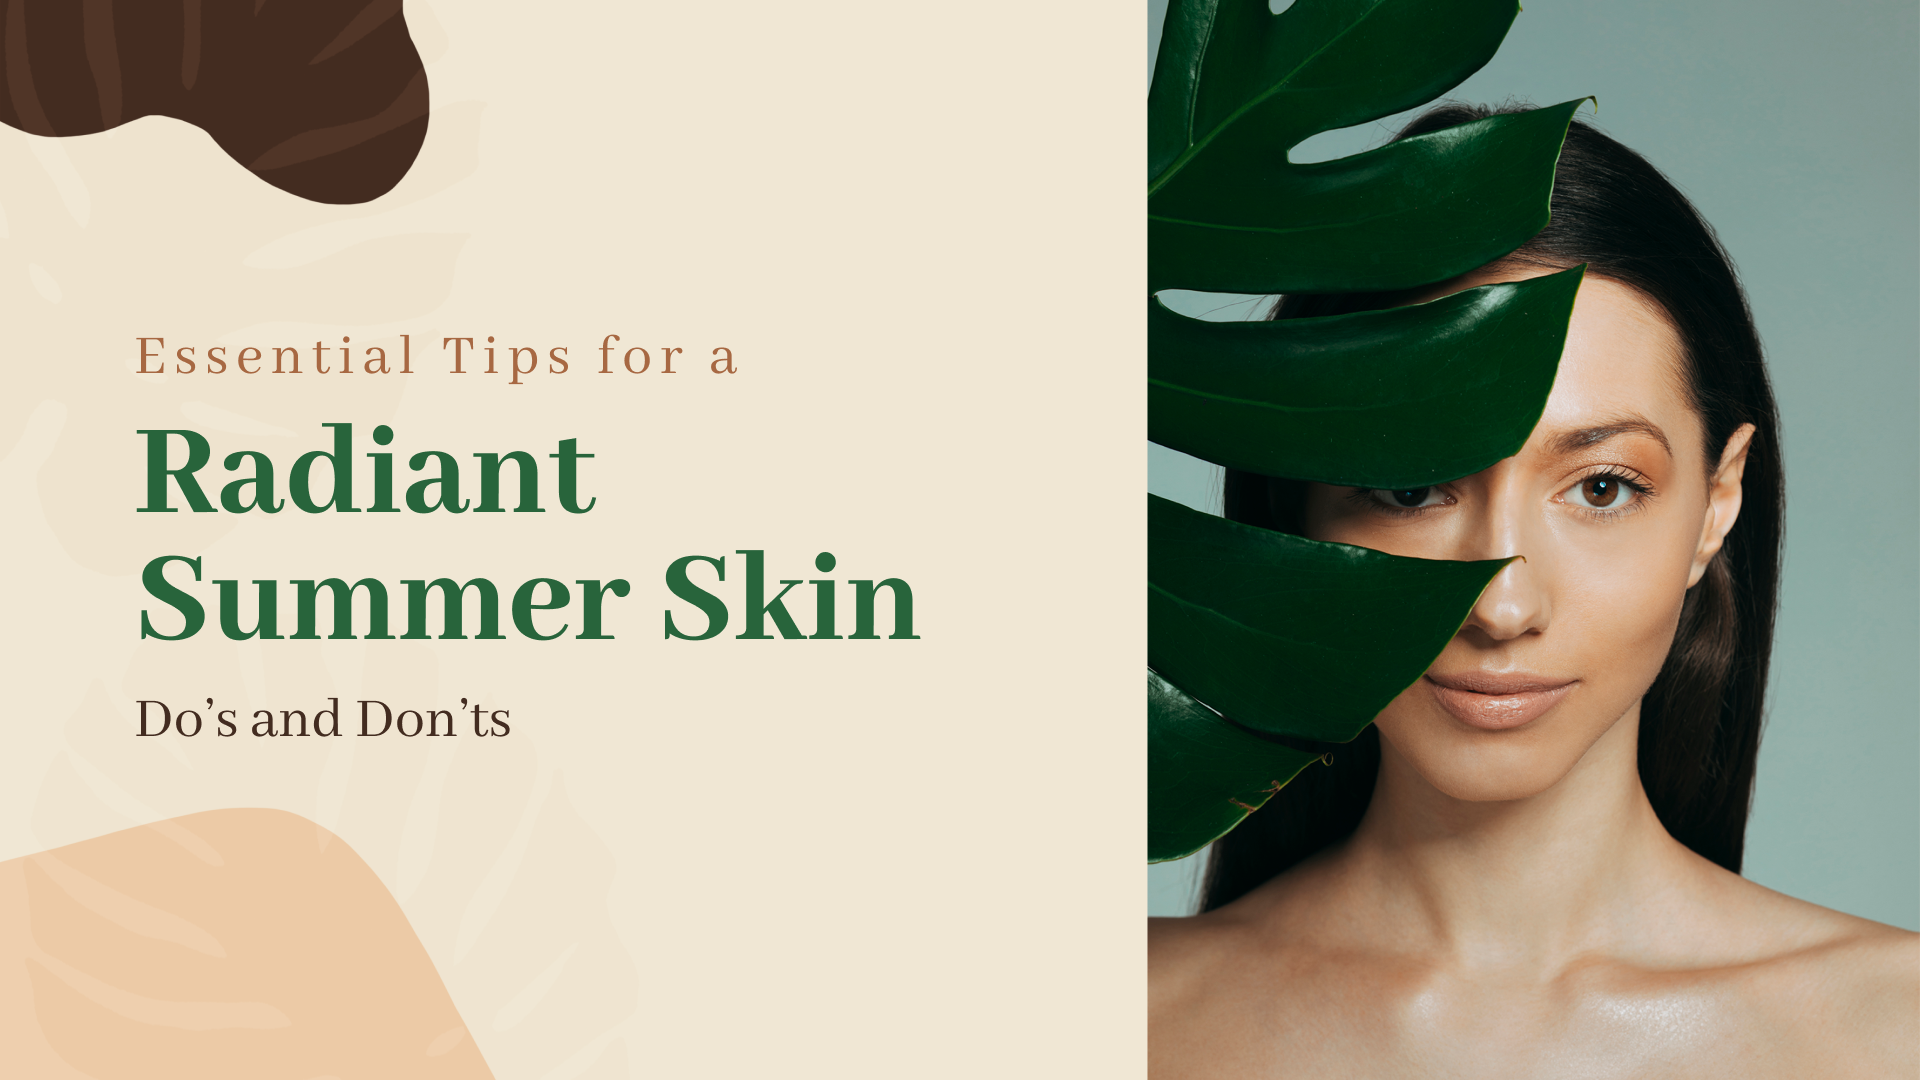 Essential Tips for a Radiant Summer Skin - Dos and Don’ts